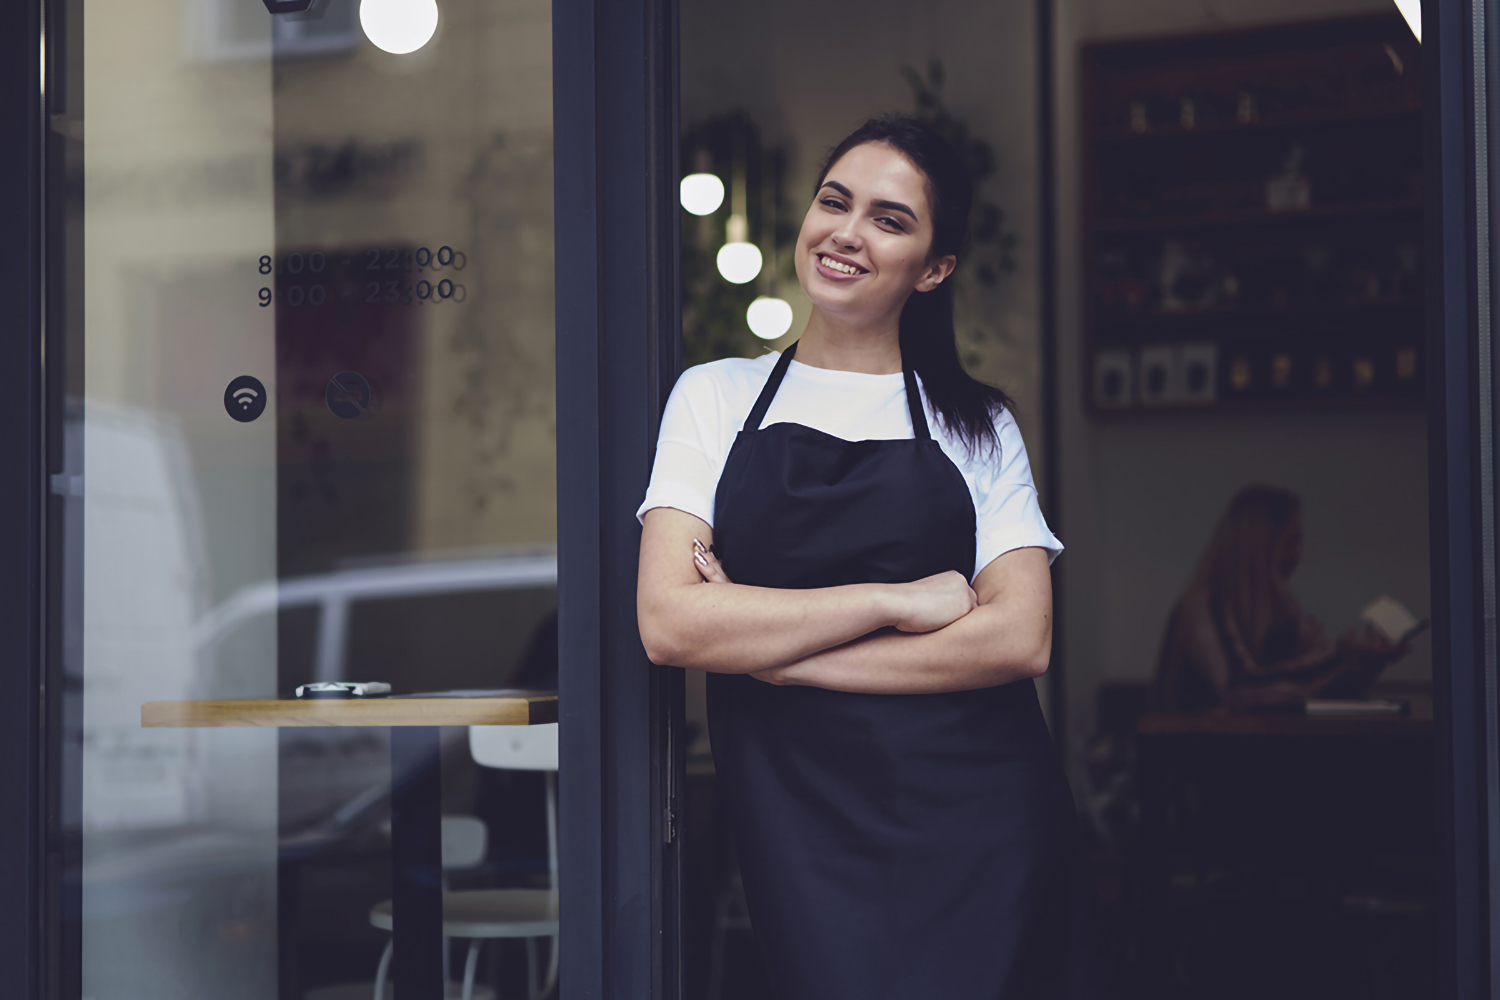 Half length portrait of young business woman waitress in black apron ready to attend new customers in her just opened coffee shop.Female owner of restaurant with smile standing near cafe door entrance